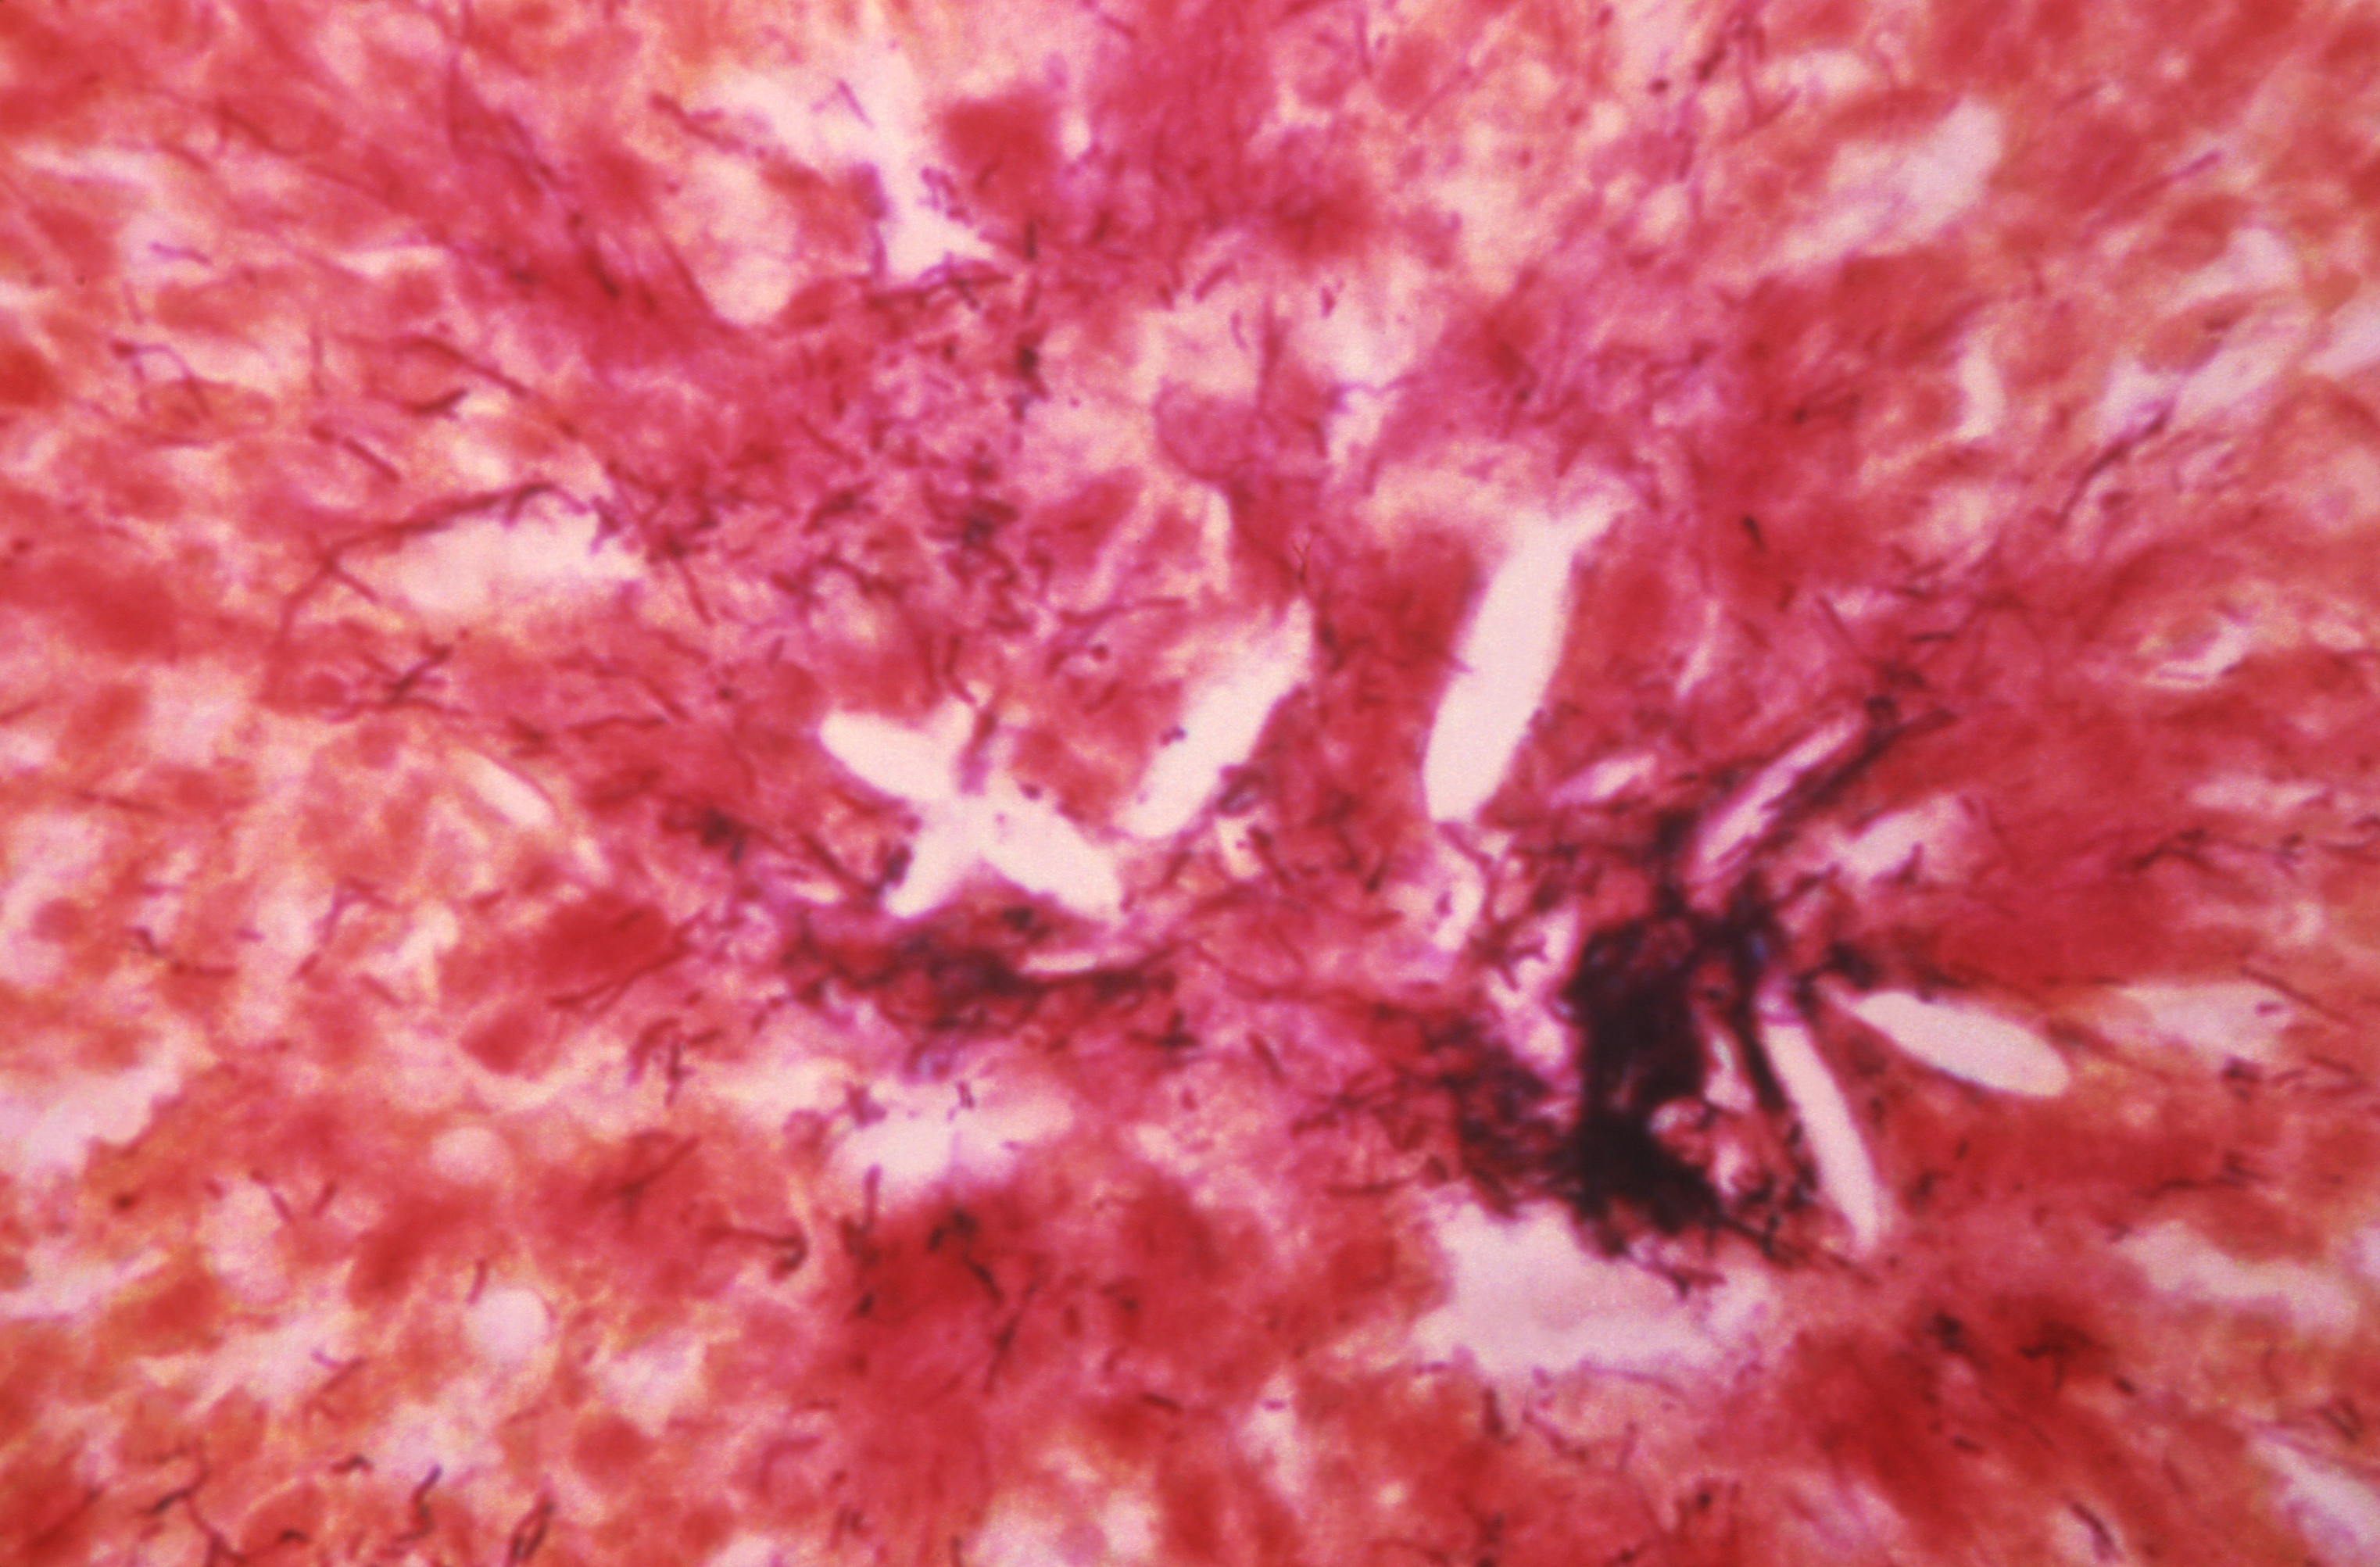 Under a magnification of 200X, this photomicrograph of a Gram-stained brain tissue specimen, revealed the presence of a chronic inflammatory sulfur granule in a case of actinomycosis, caused by a Gram-positive, fungus-like aerobic bacterium of the genus, Actinomyces.